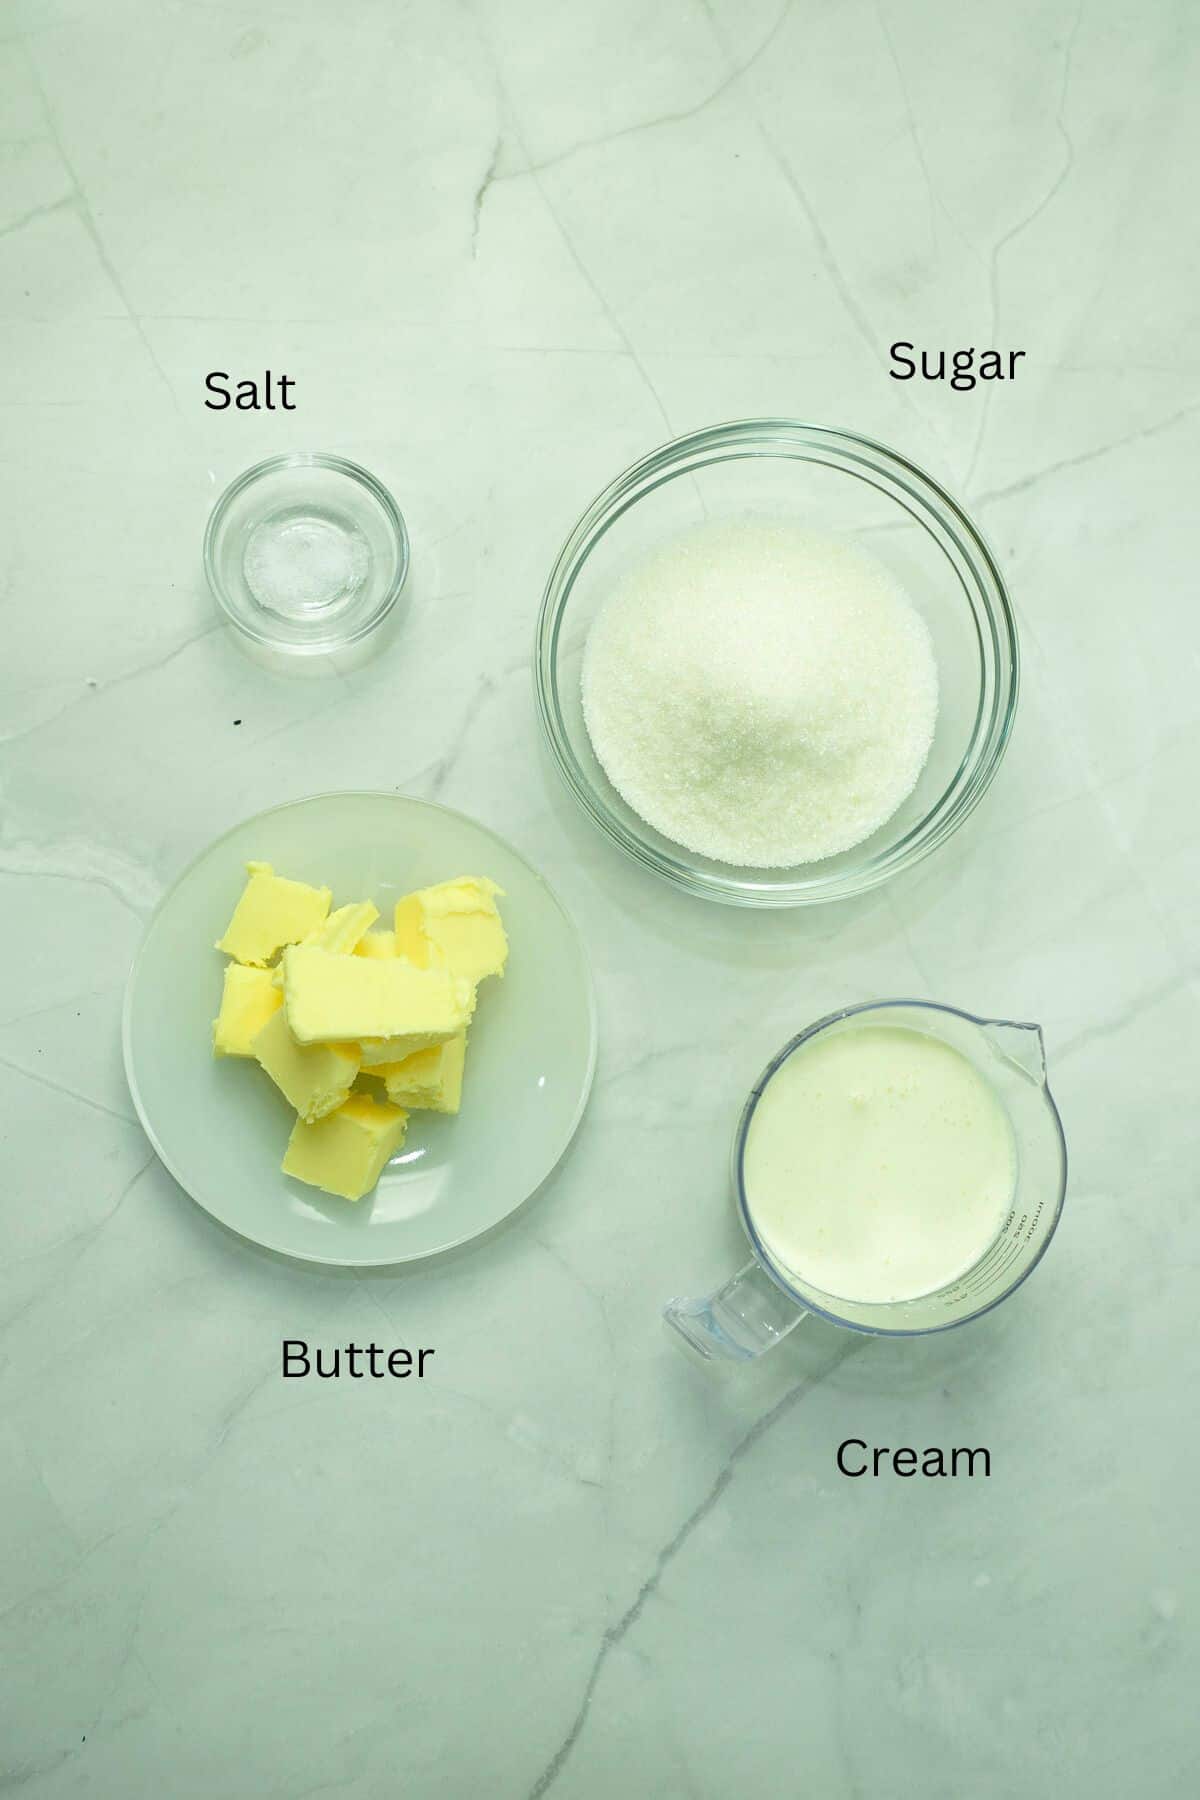 Salt, butter, sugar and cream against a marble background.